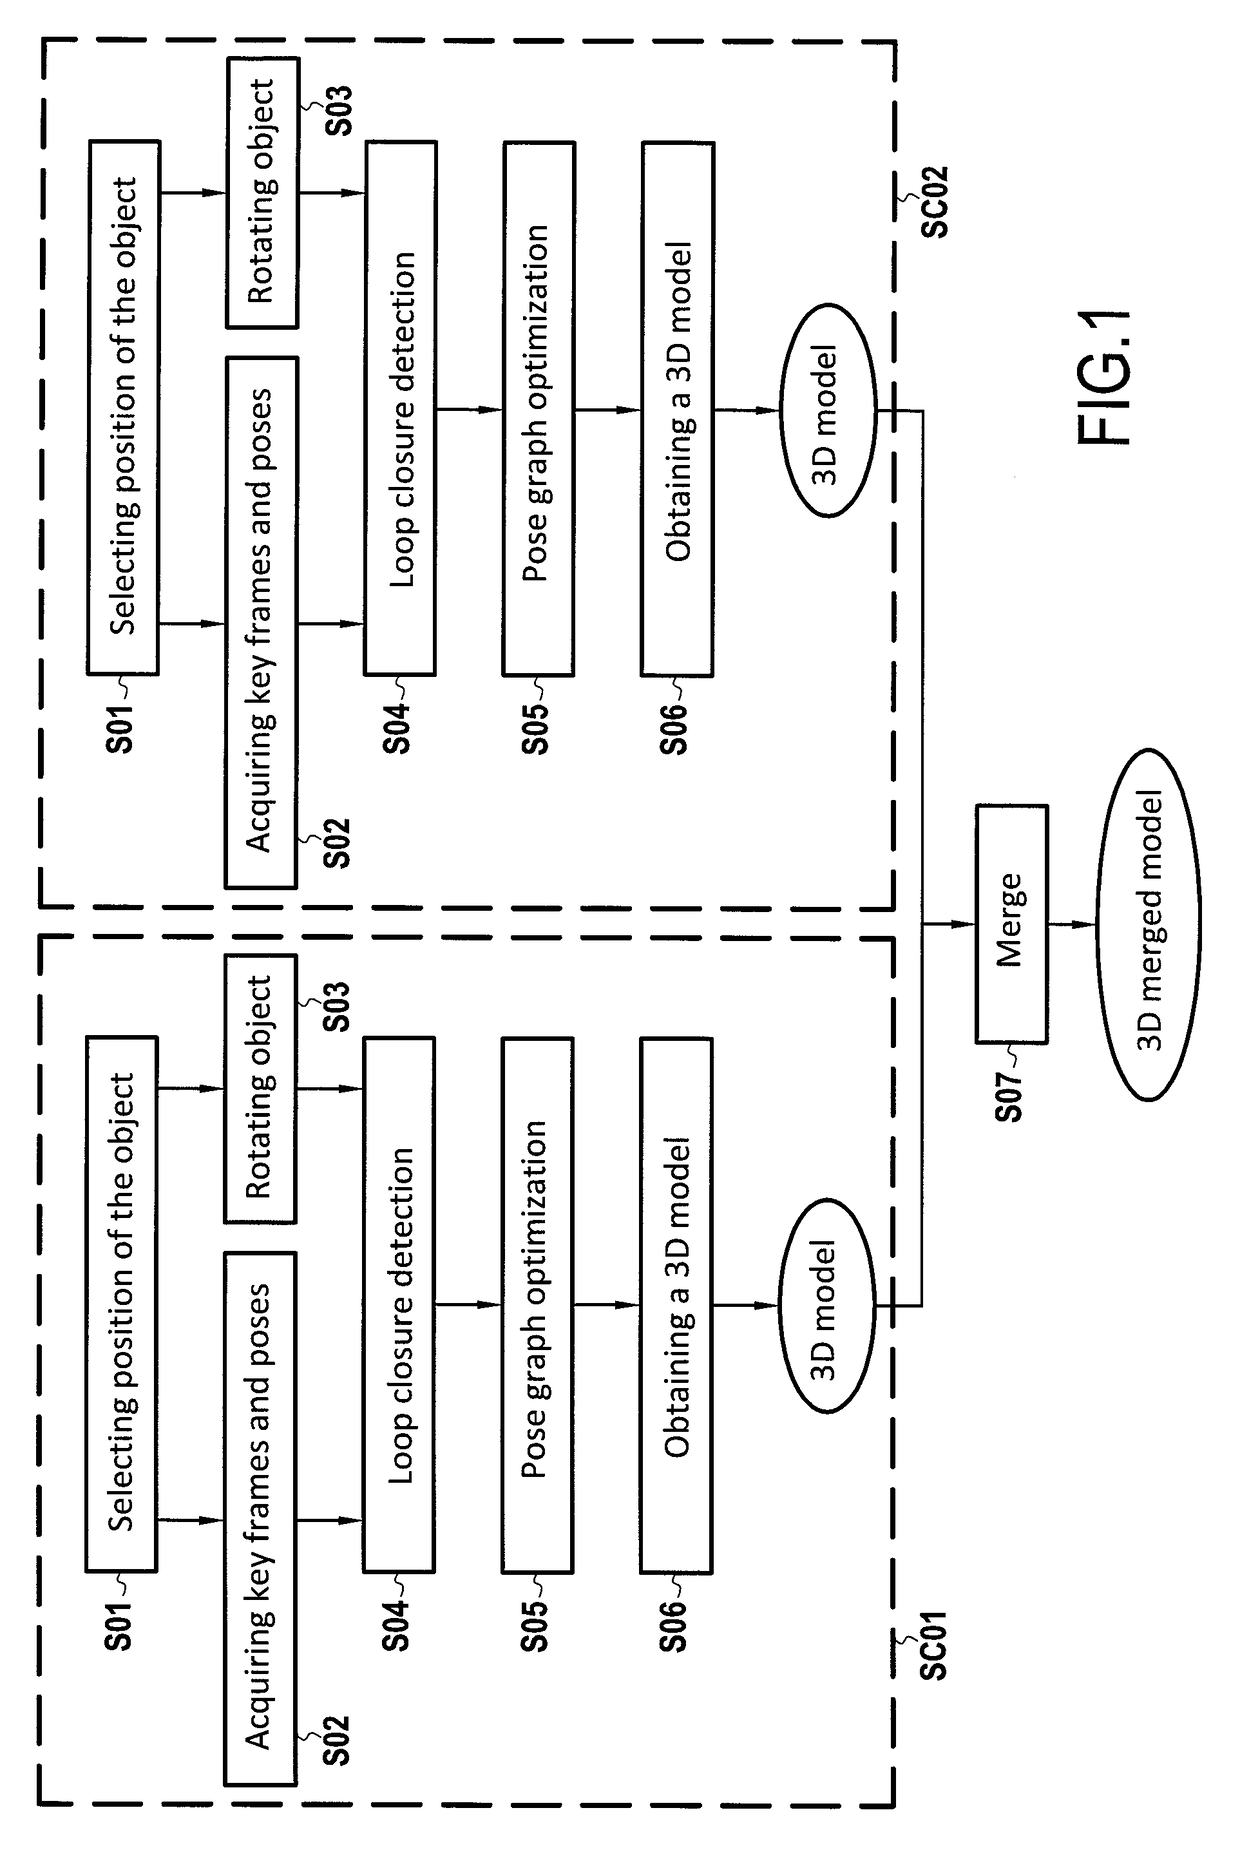 Method and system for scanning an object using an rgb-d sensor